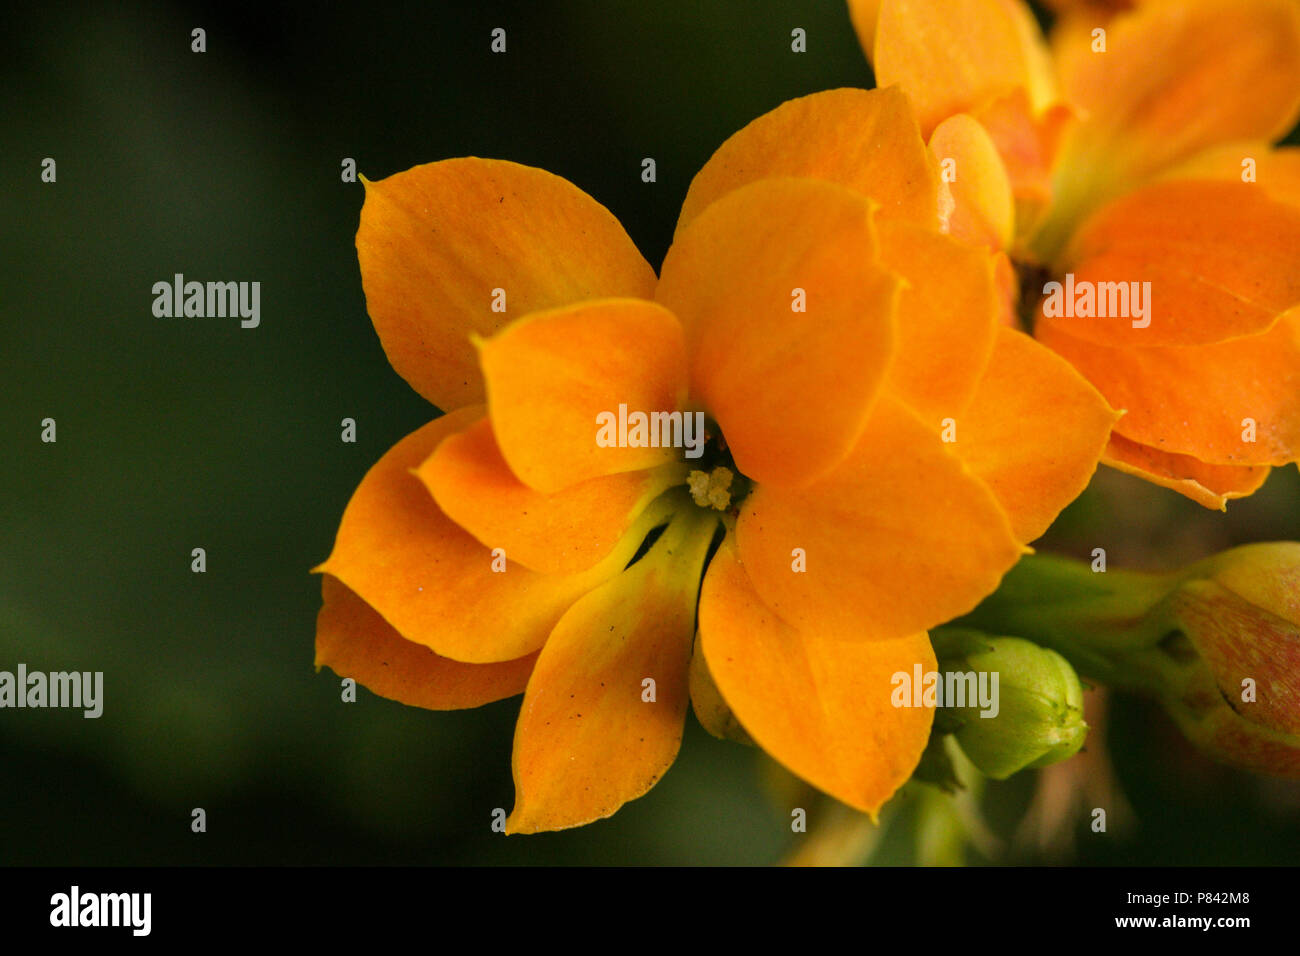 Ornamental plant with orange flowers with yellow center. Background blurred in green color. Stock Photo